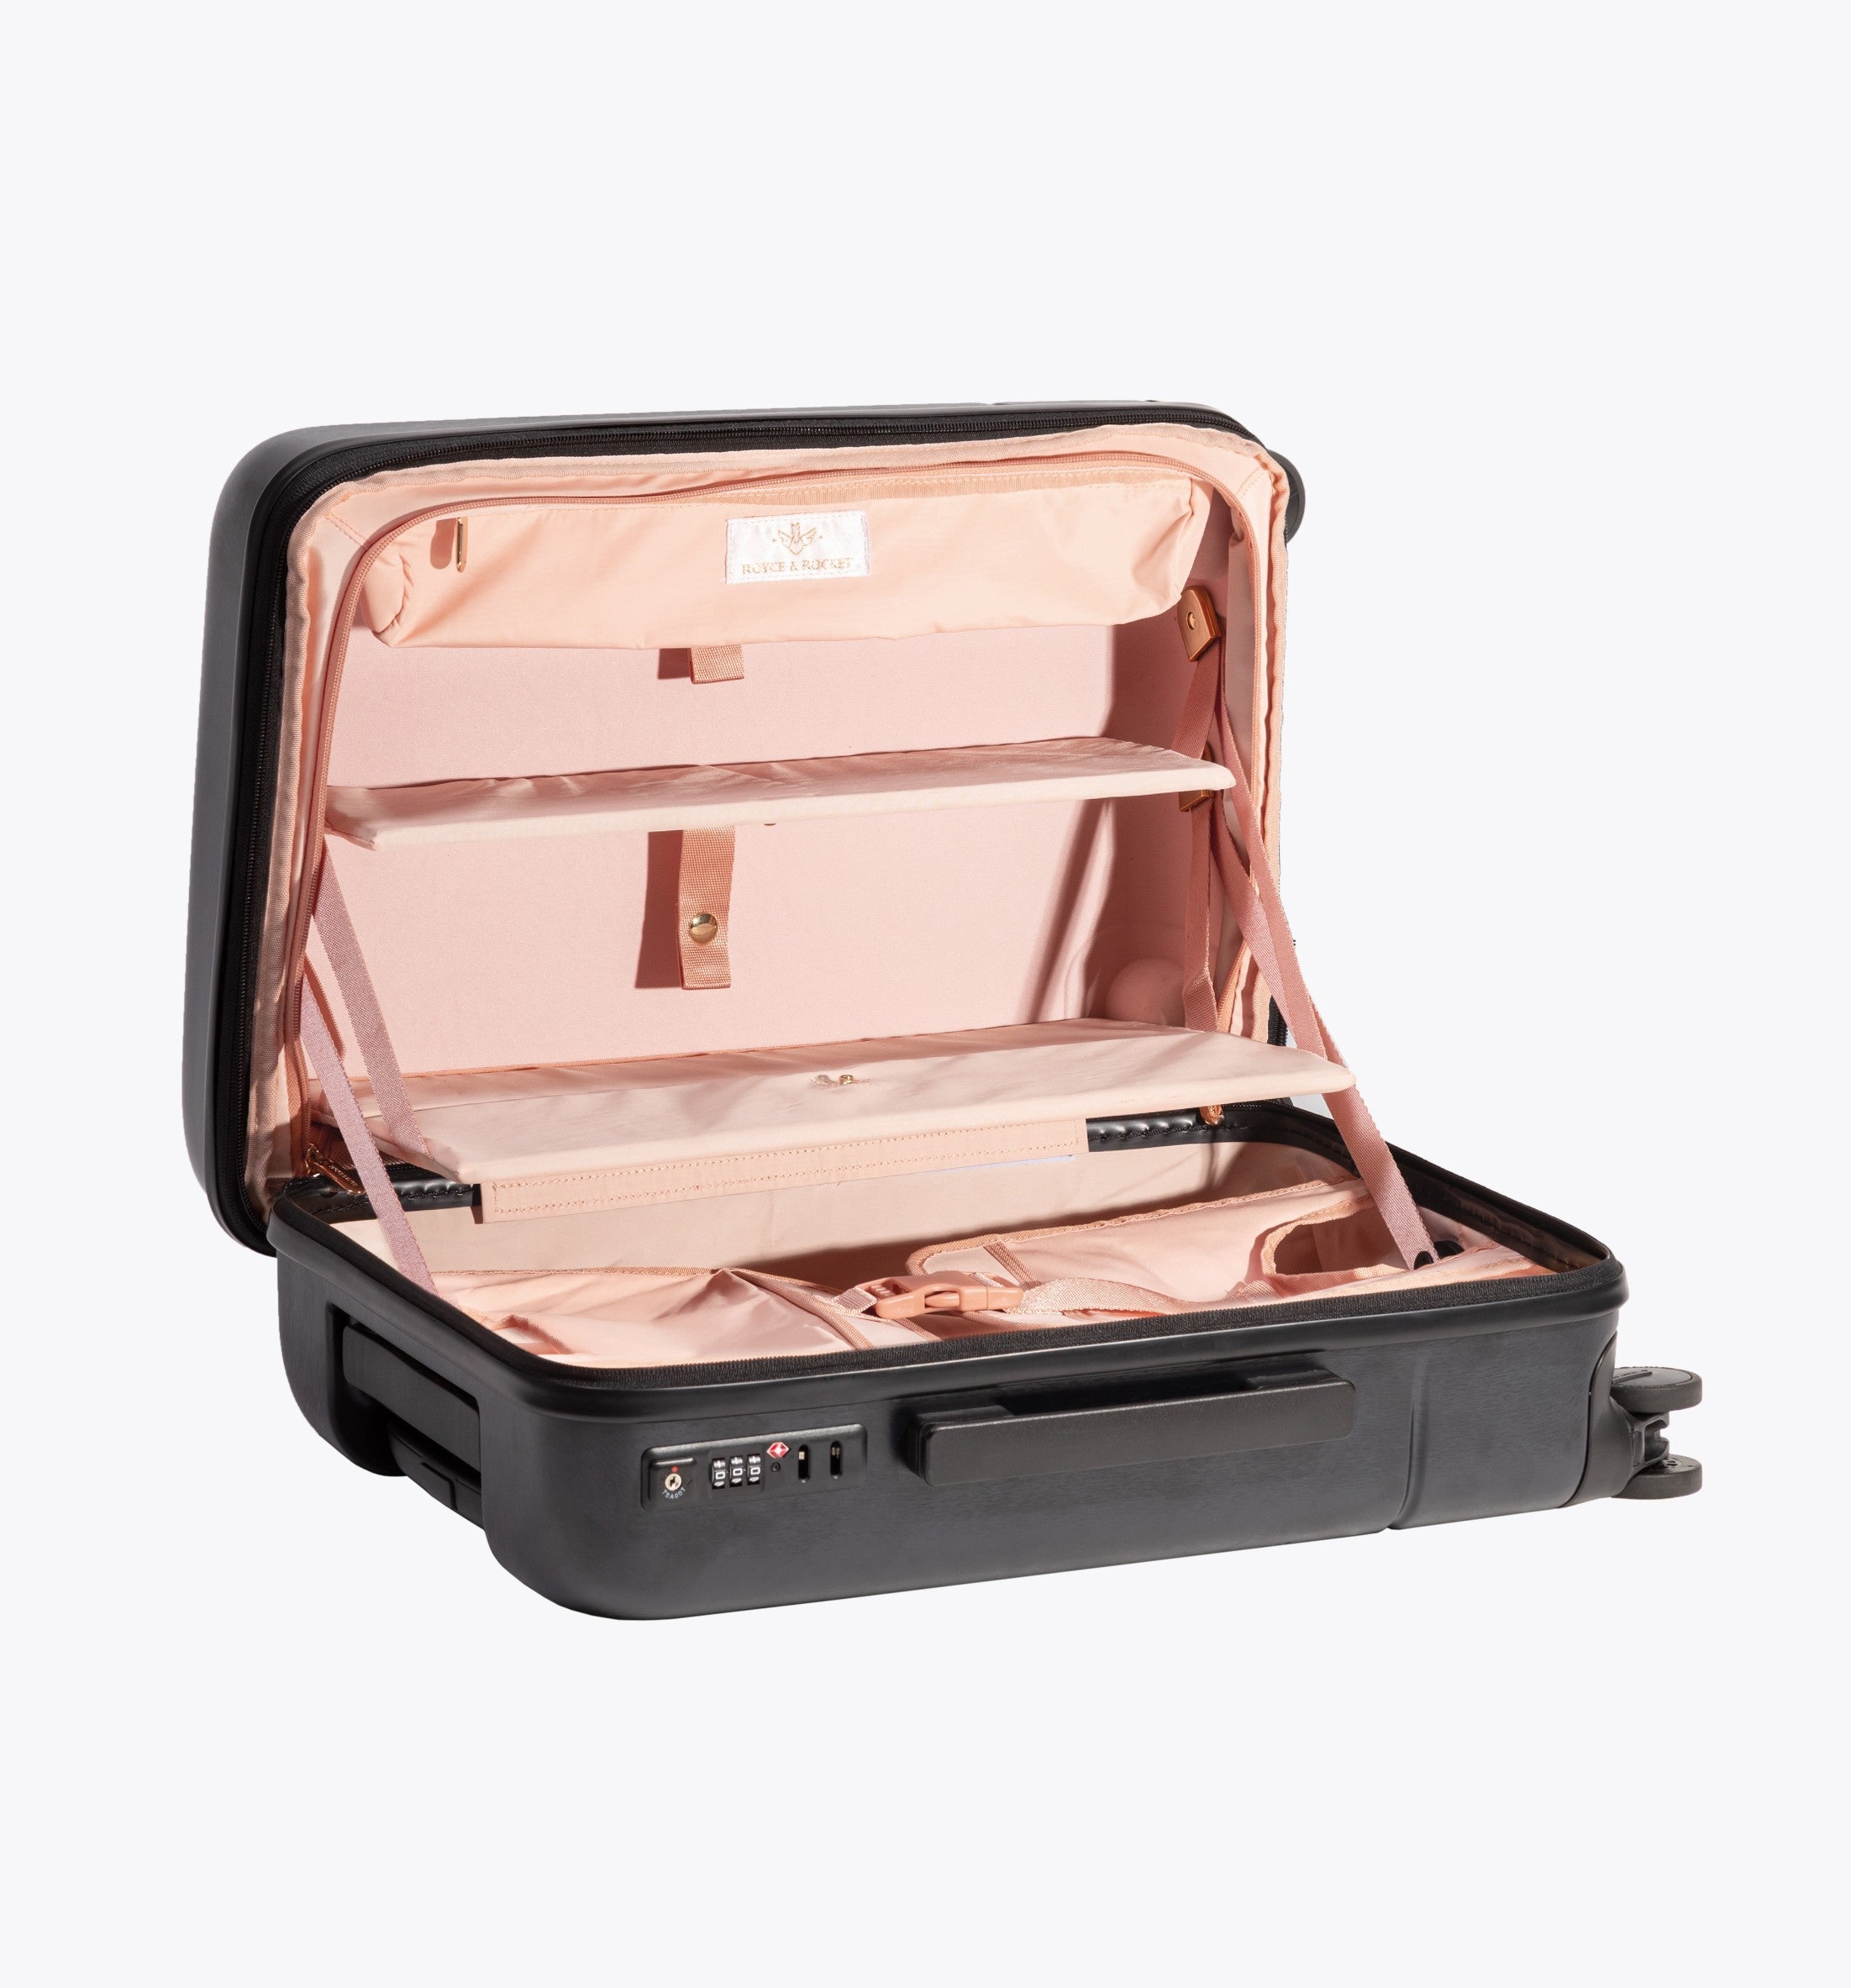 royce and rocket roller carryon with pink organization shelves